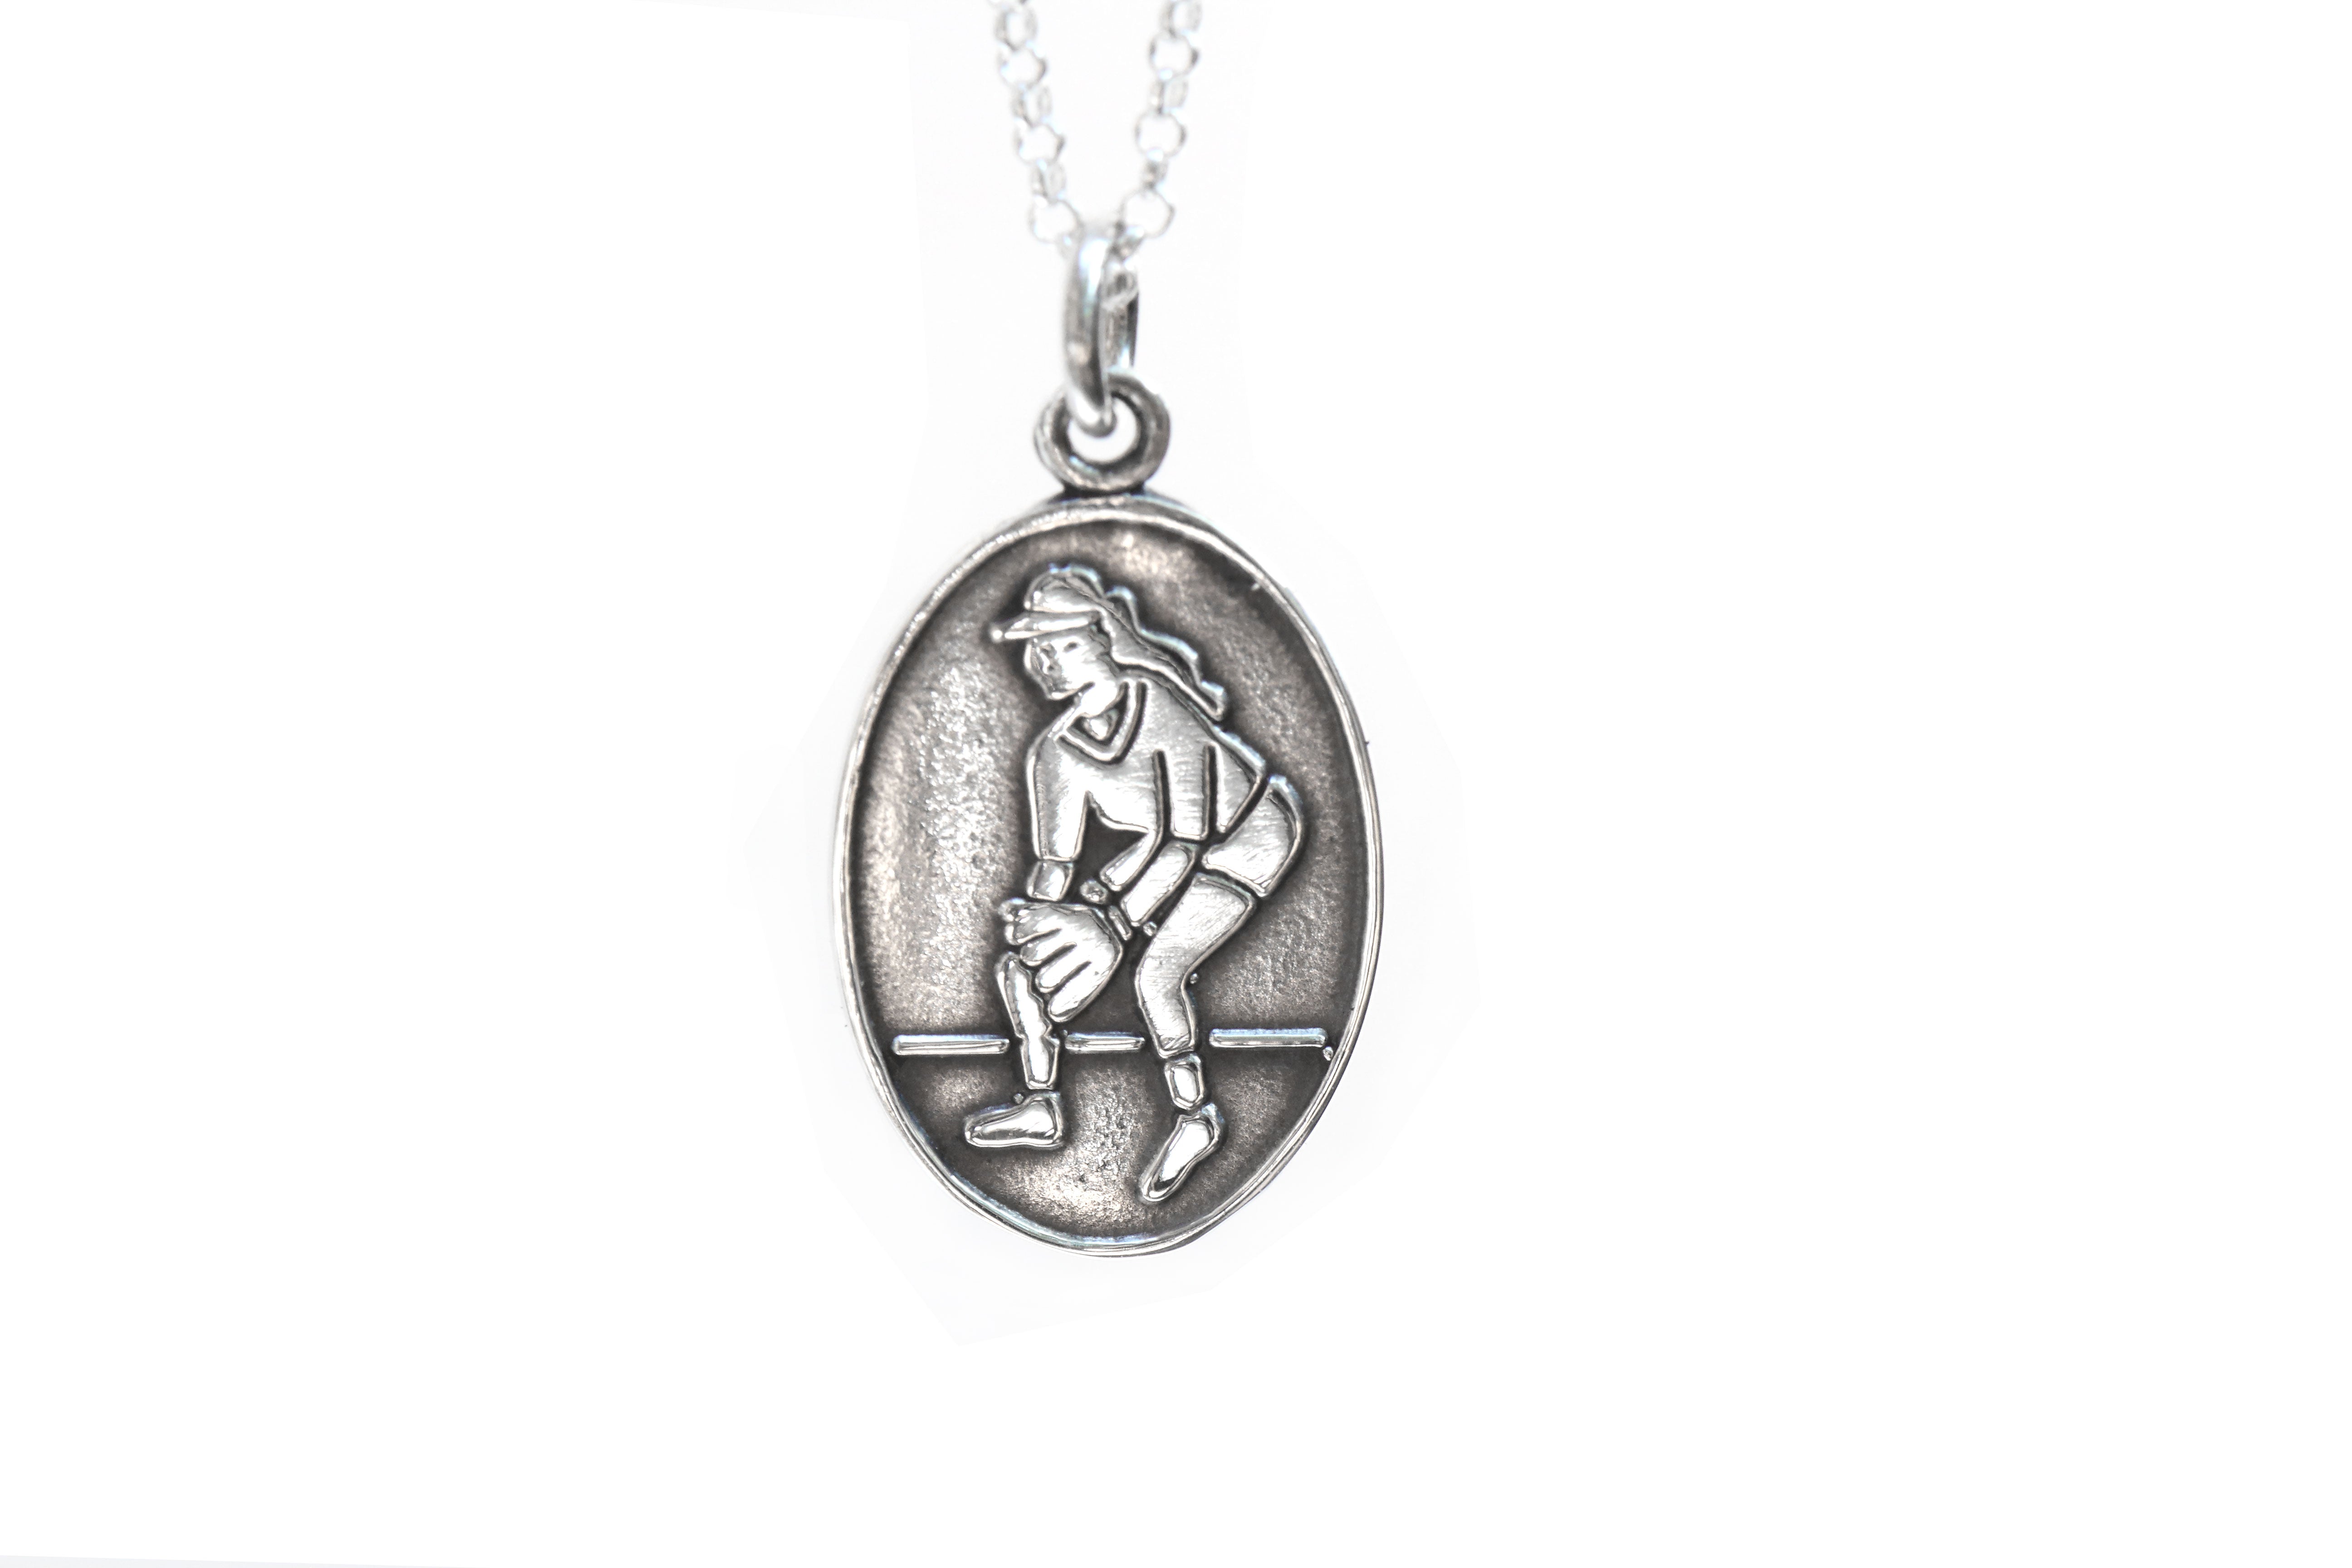 Sterling silver baseball player necklace